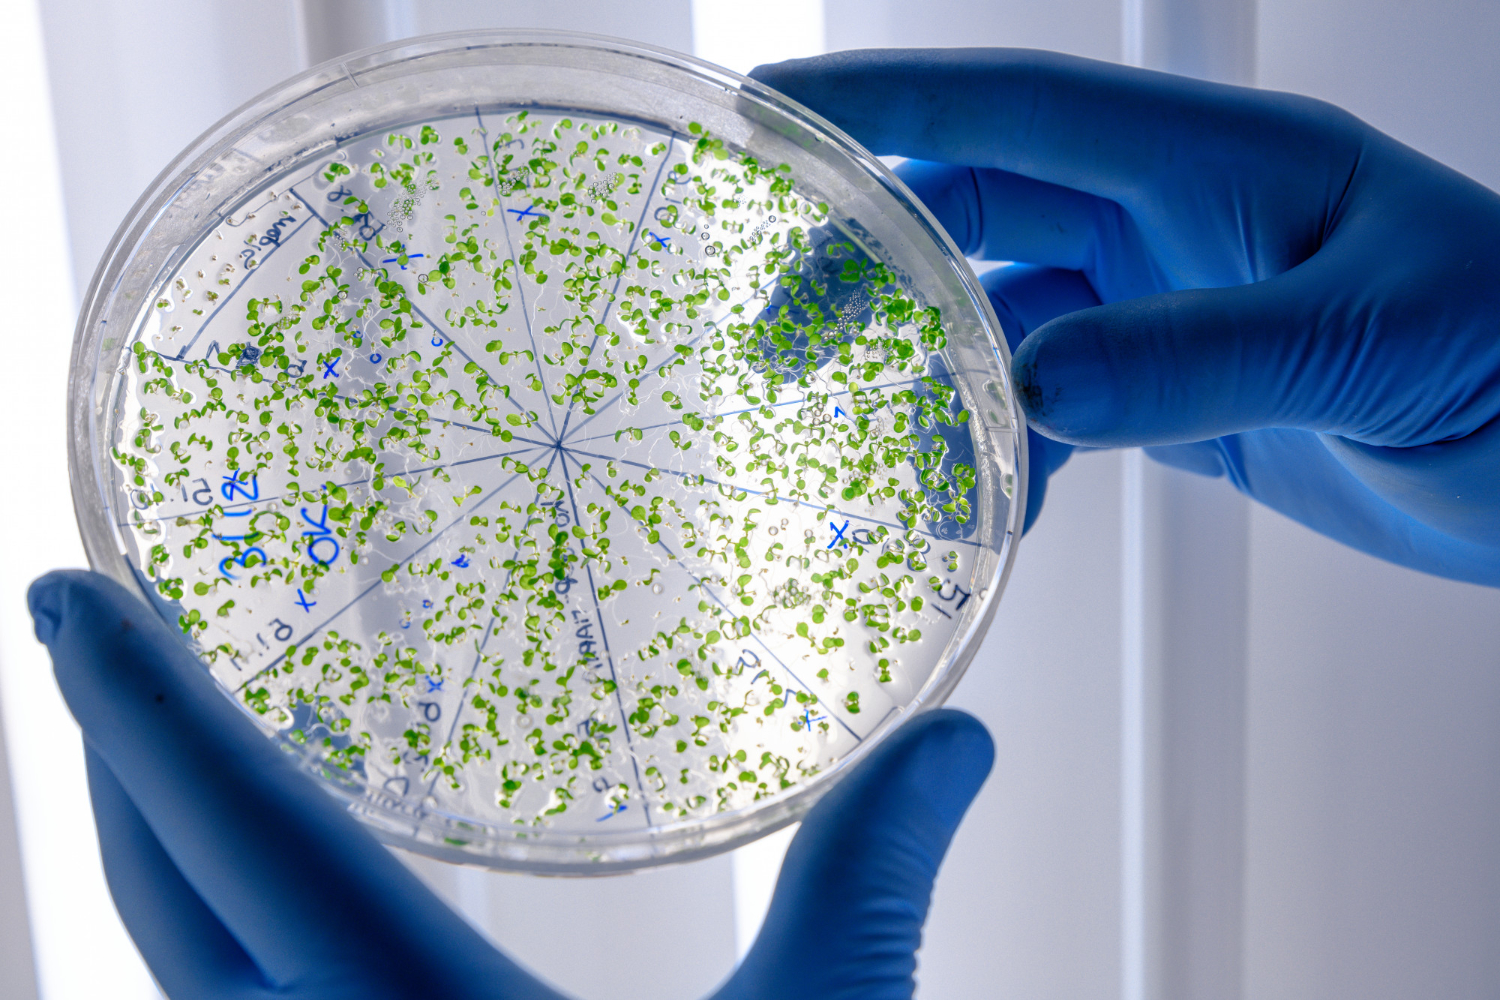 A scientist holds a petri dish scattered with green bacteria.